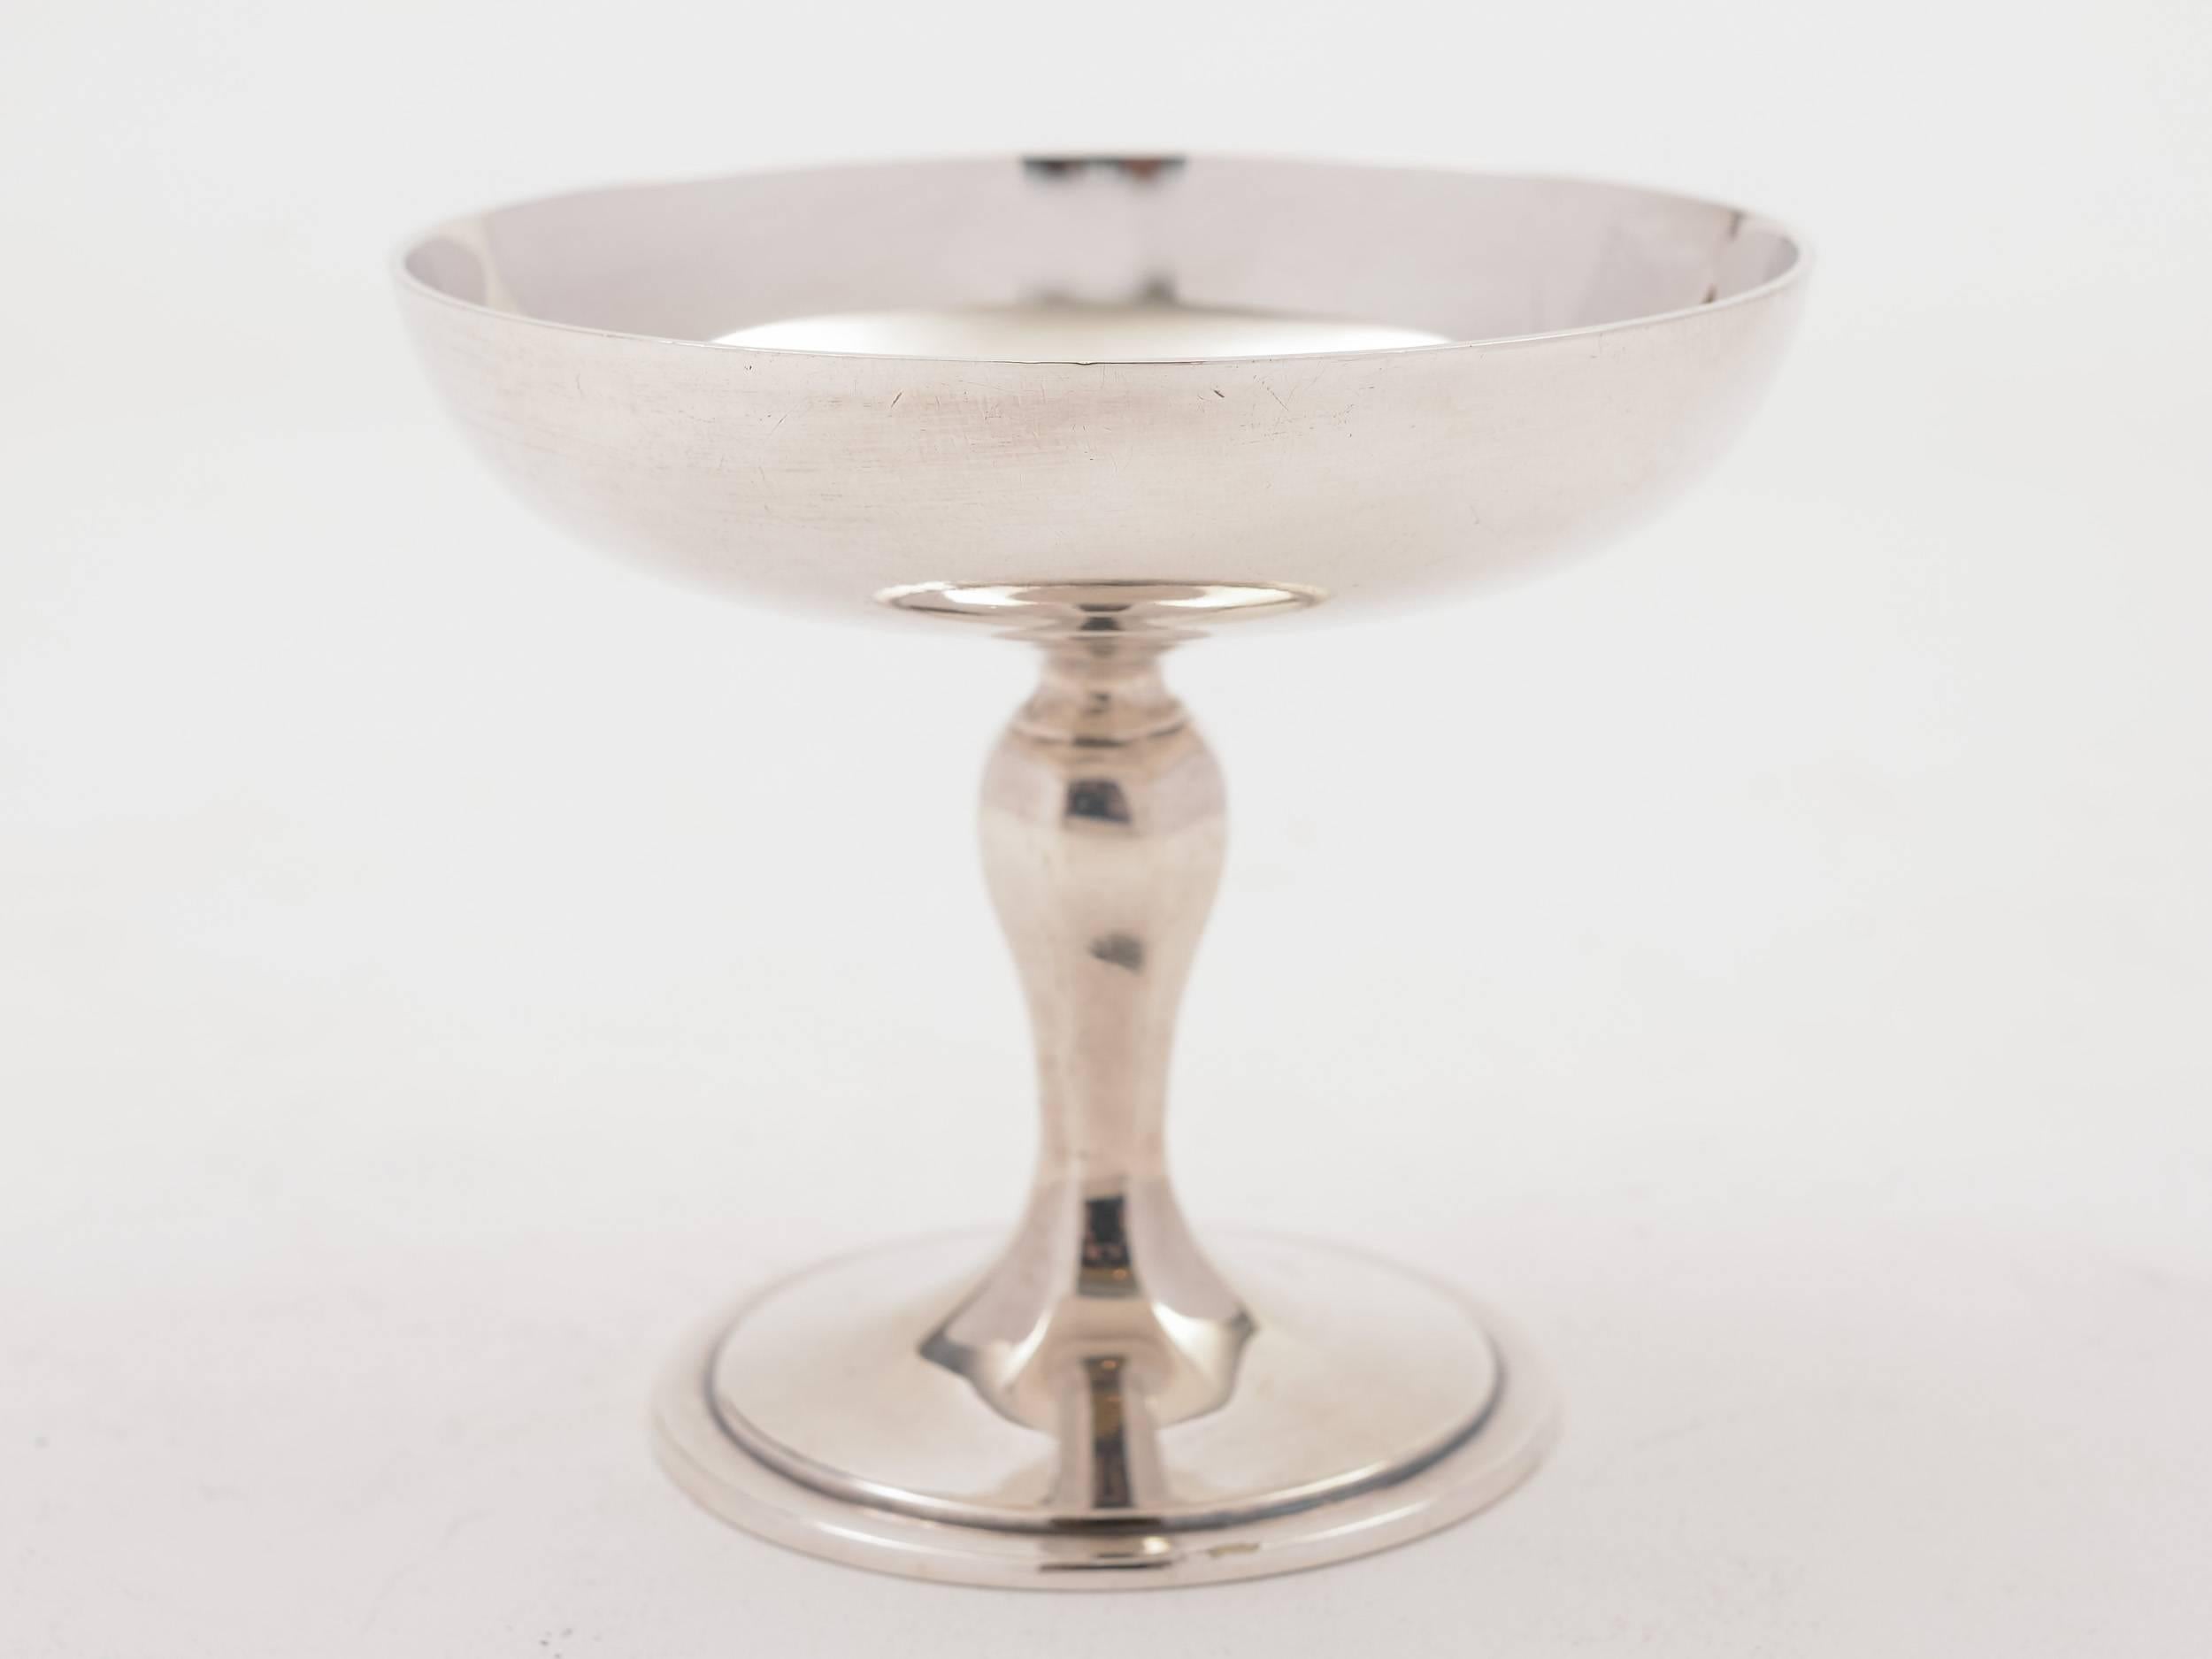 A stunning set of six English Art Deco silver plated ice cream dishes (could be used for any a range of desserts) made by the renowned maker, Elkington & Co with date letter for 1933.

Measurements:
Height: 3 1/4